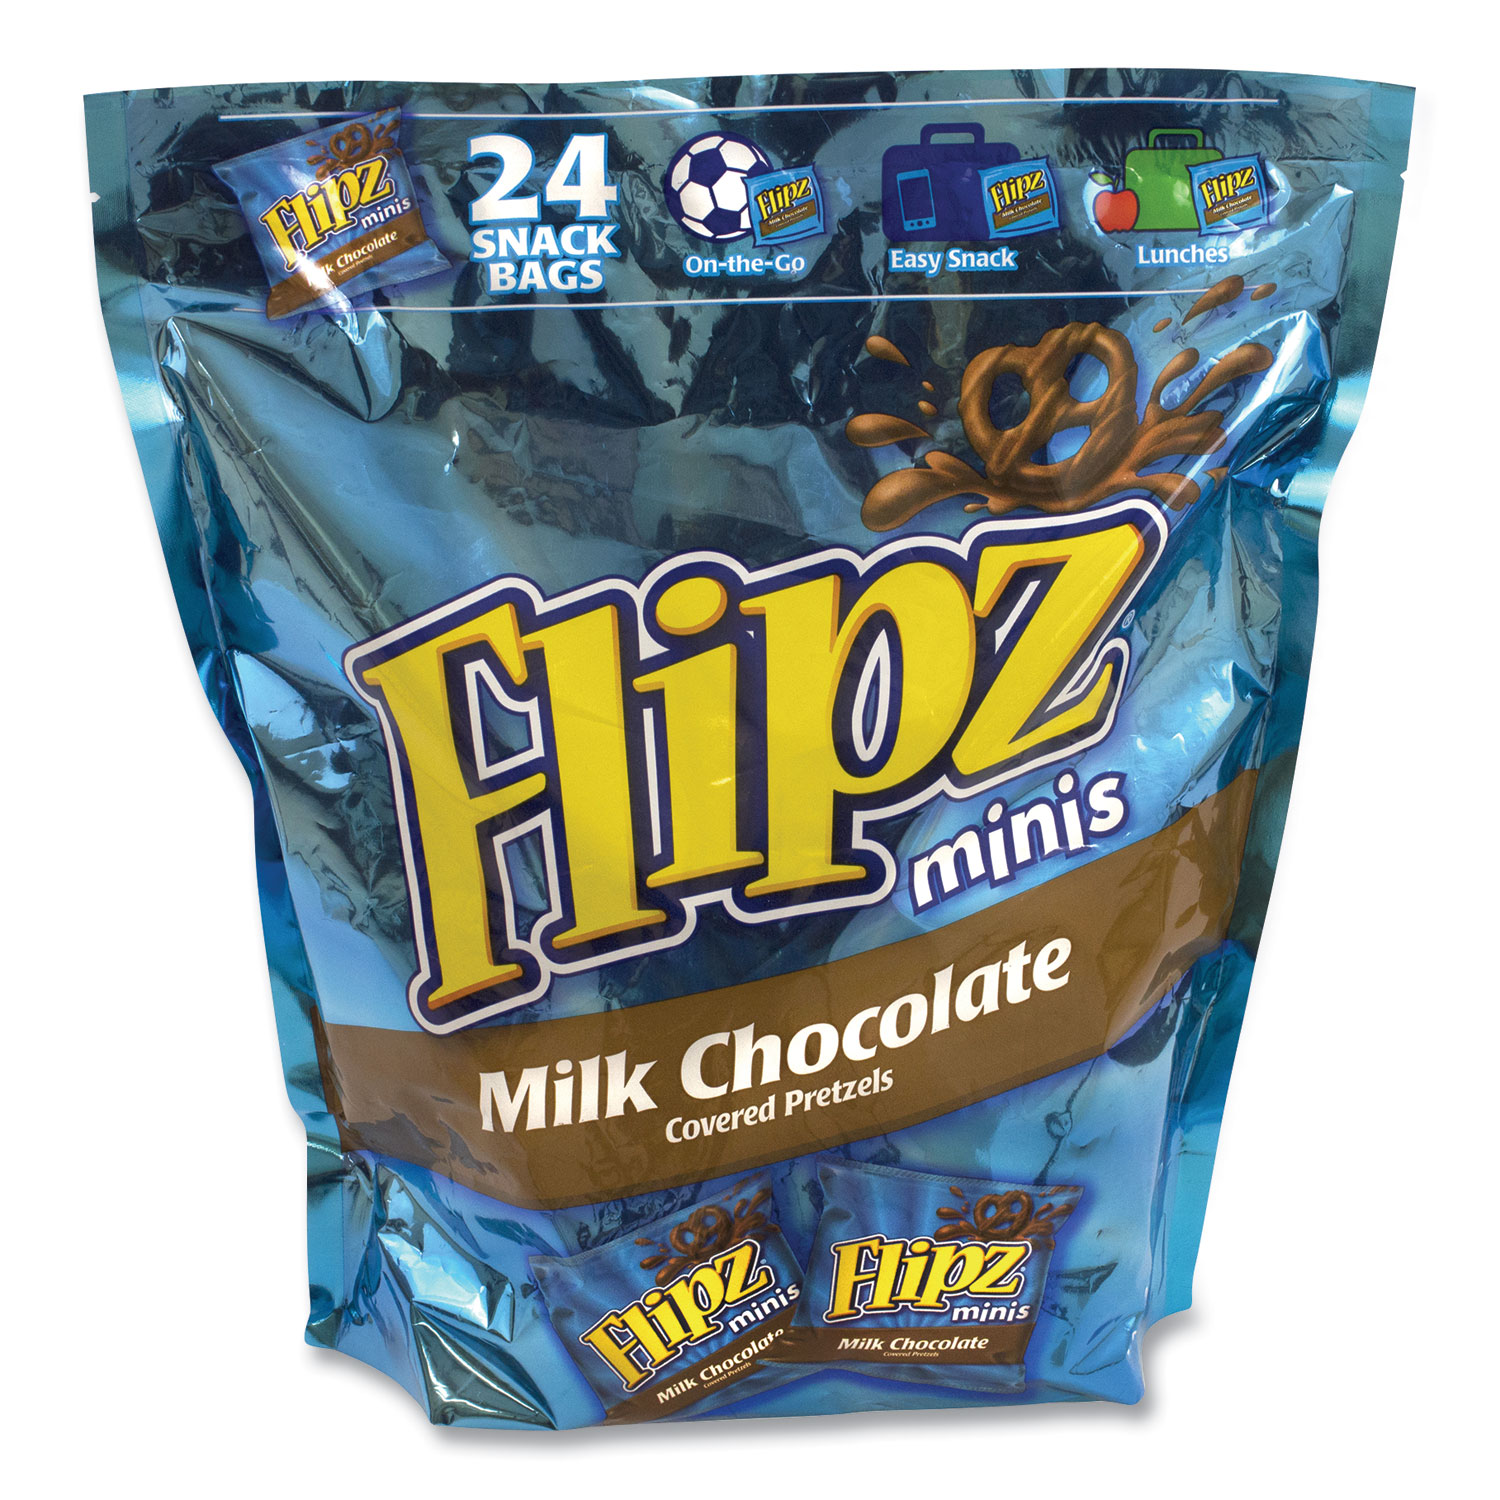  Flipz 32 Minis Milk Chocolate Covered Pretzels, 1 oz Pouch, 24 Pouches/Box, Free Delivery in 1-4 Business Days (GRR22000676) 